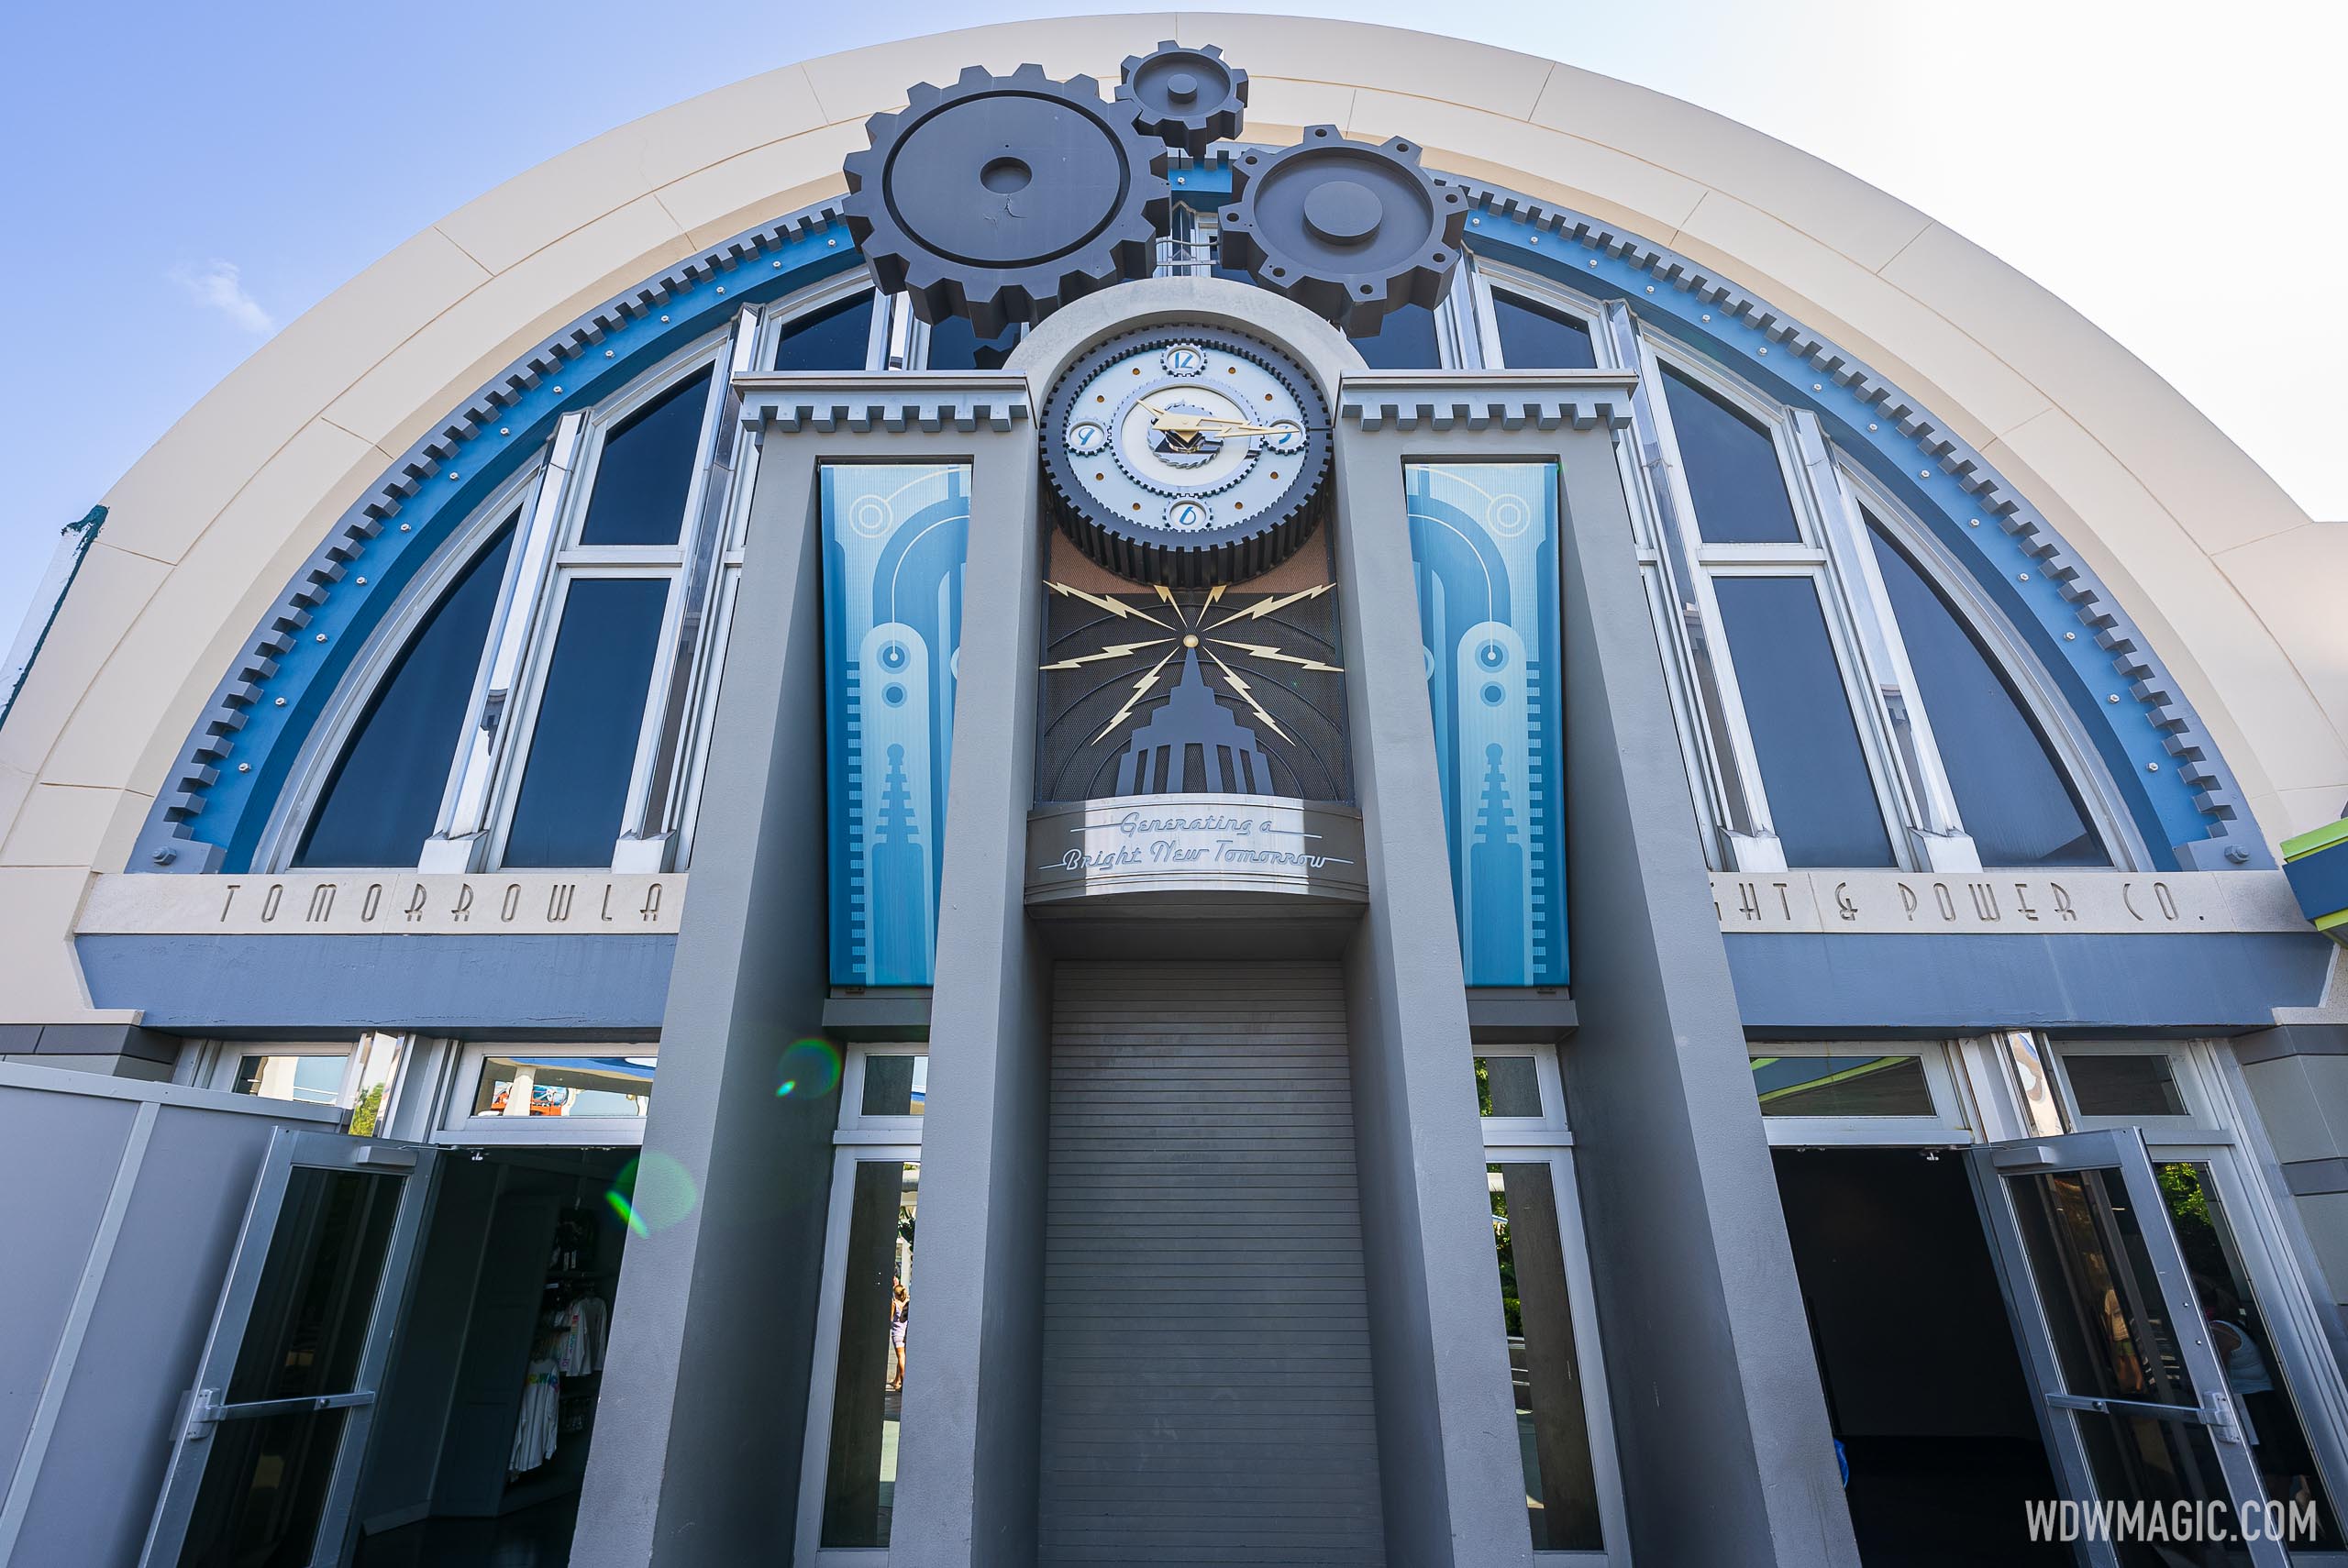 Tomorrowland Light and Power Co.closure extended as work continues on converting it for the TRON Lightcycle Run exit